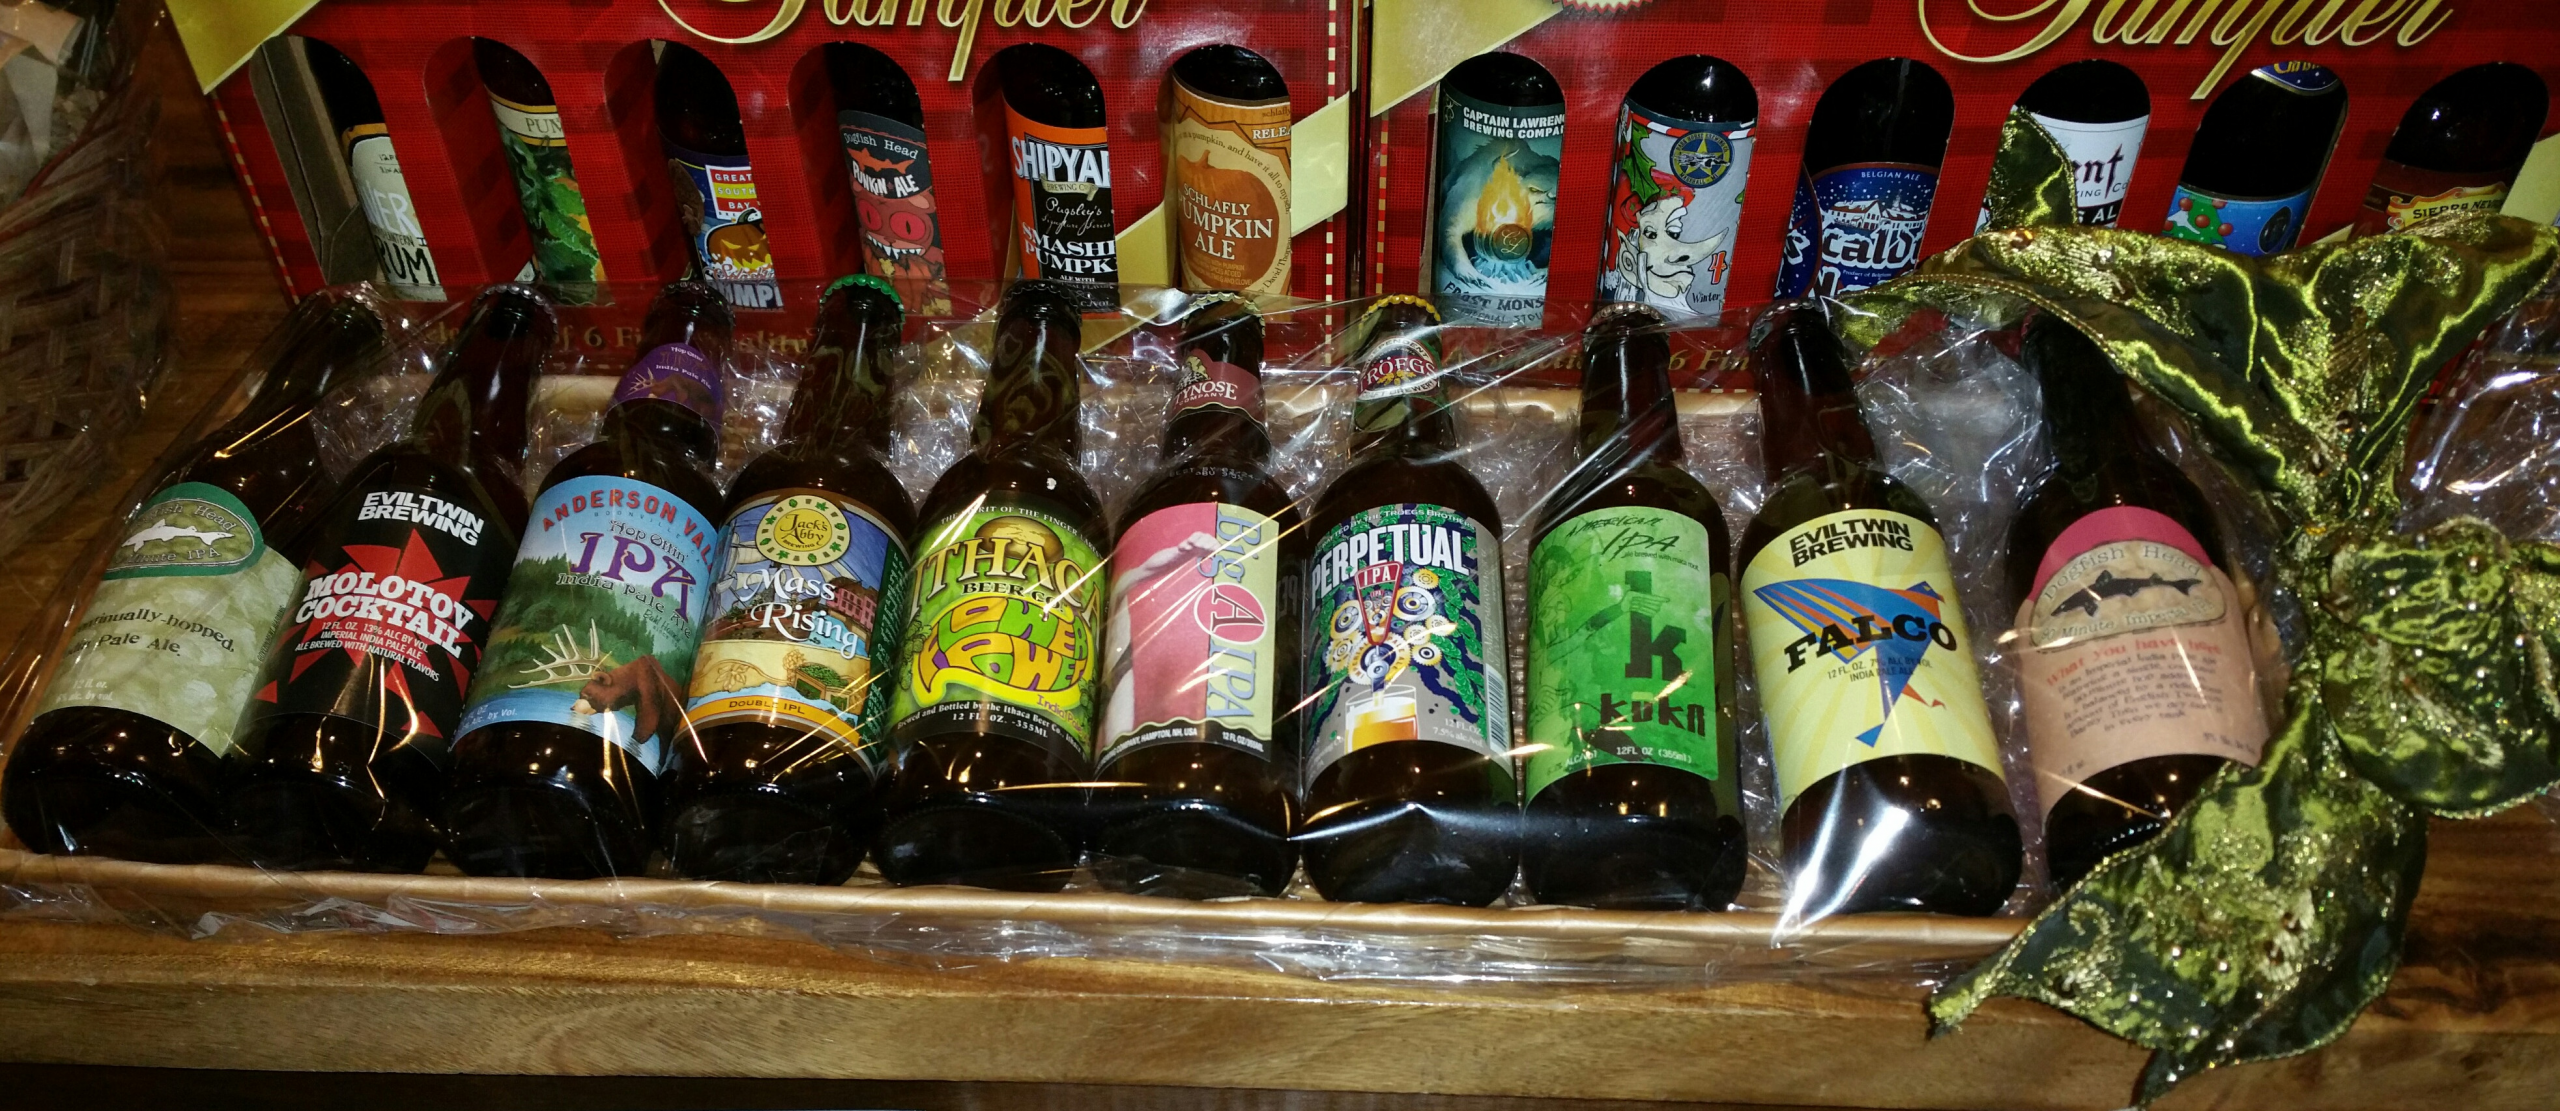 Craft Beer Gift Ideas
 Craft Beer Gift Baskets for Beer Lovers Growler & Gill